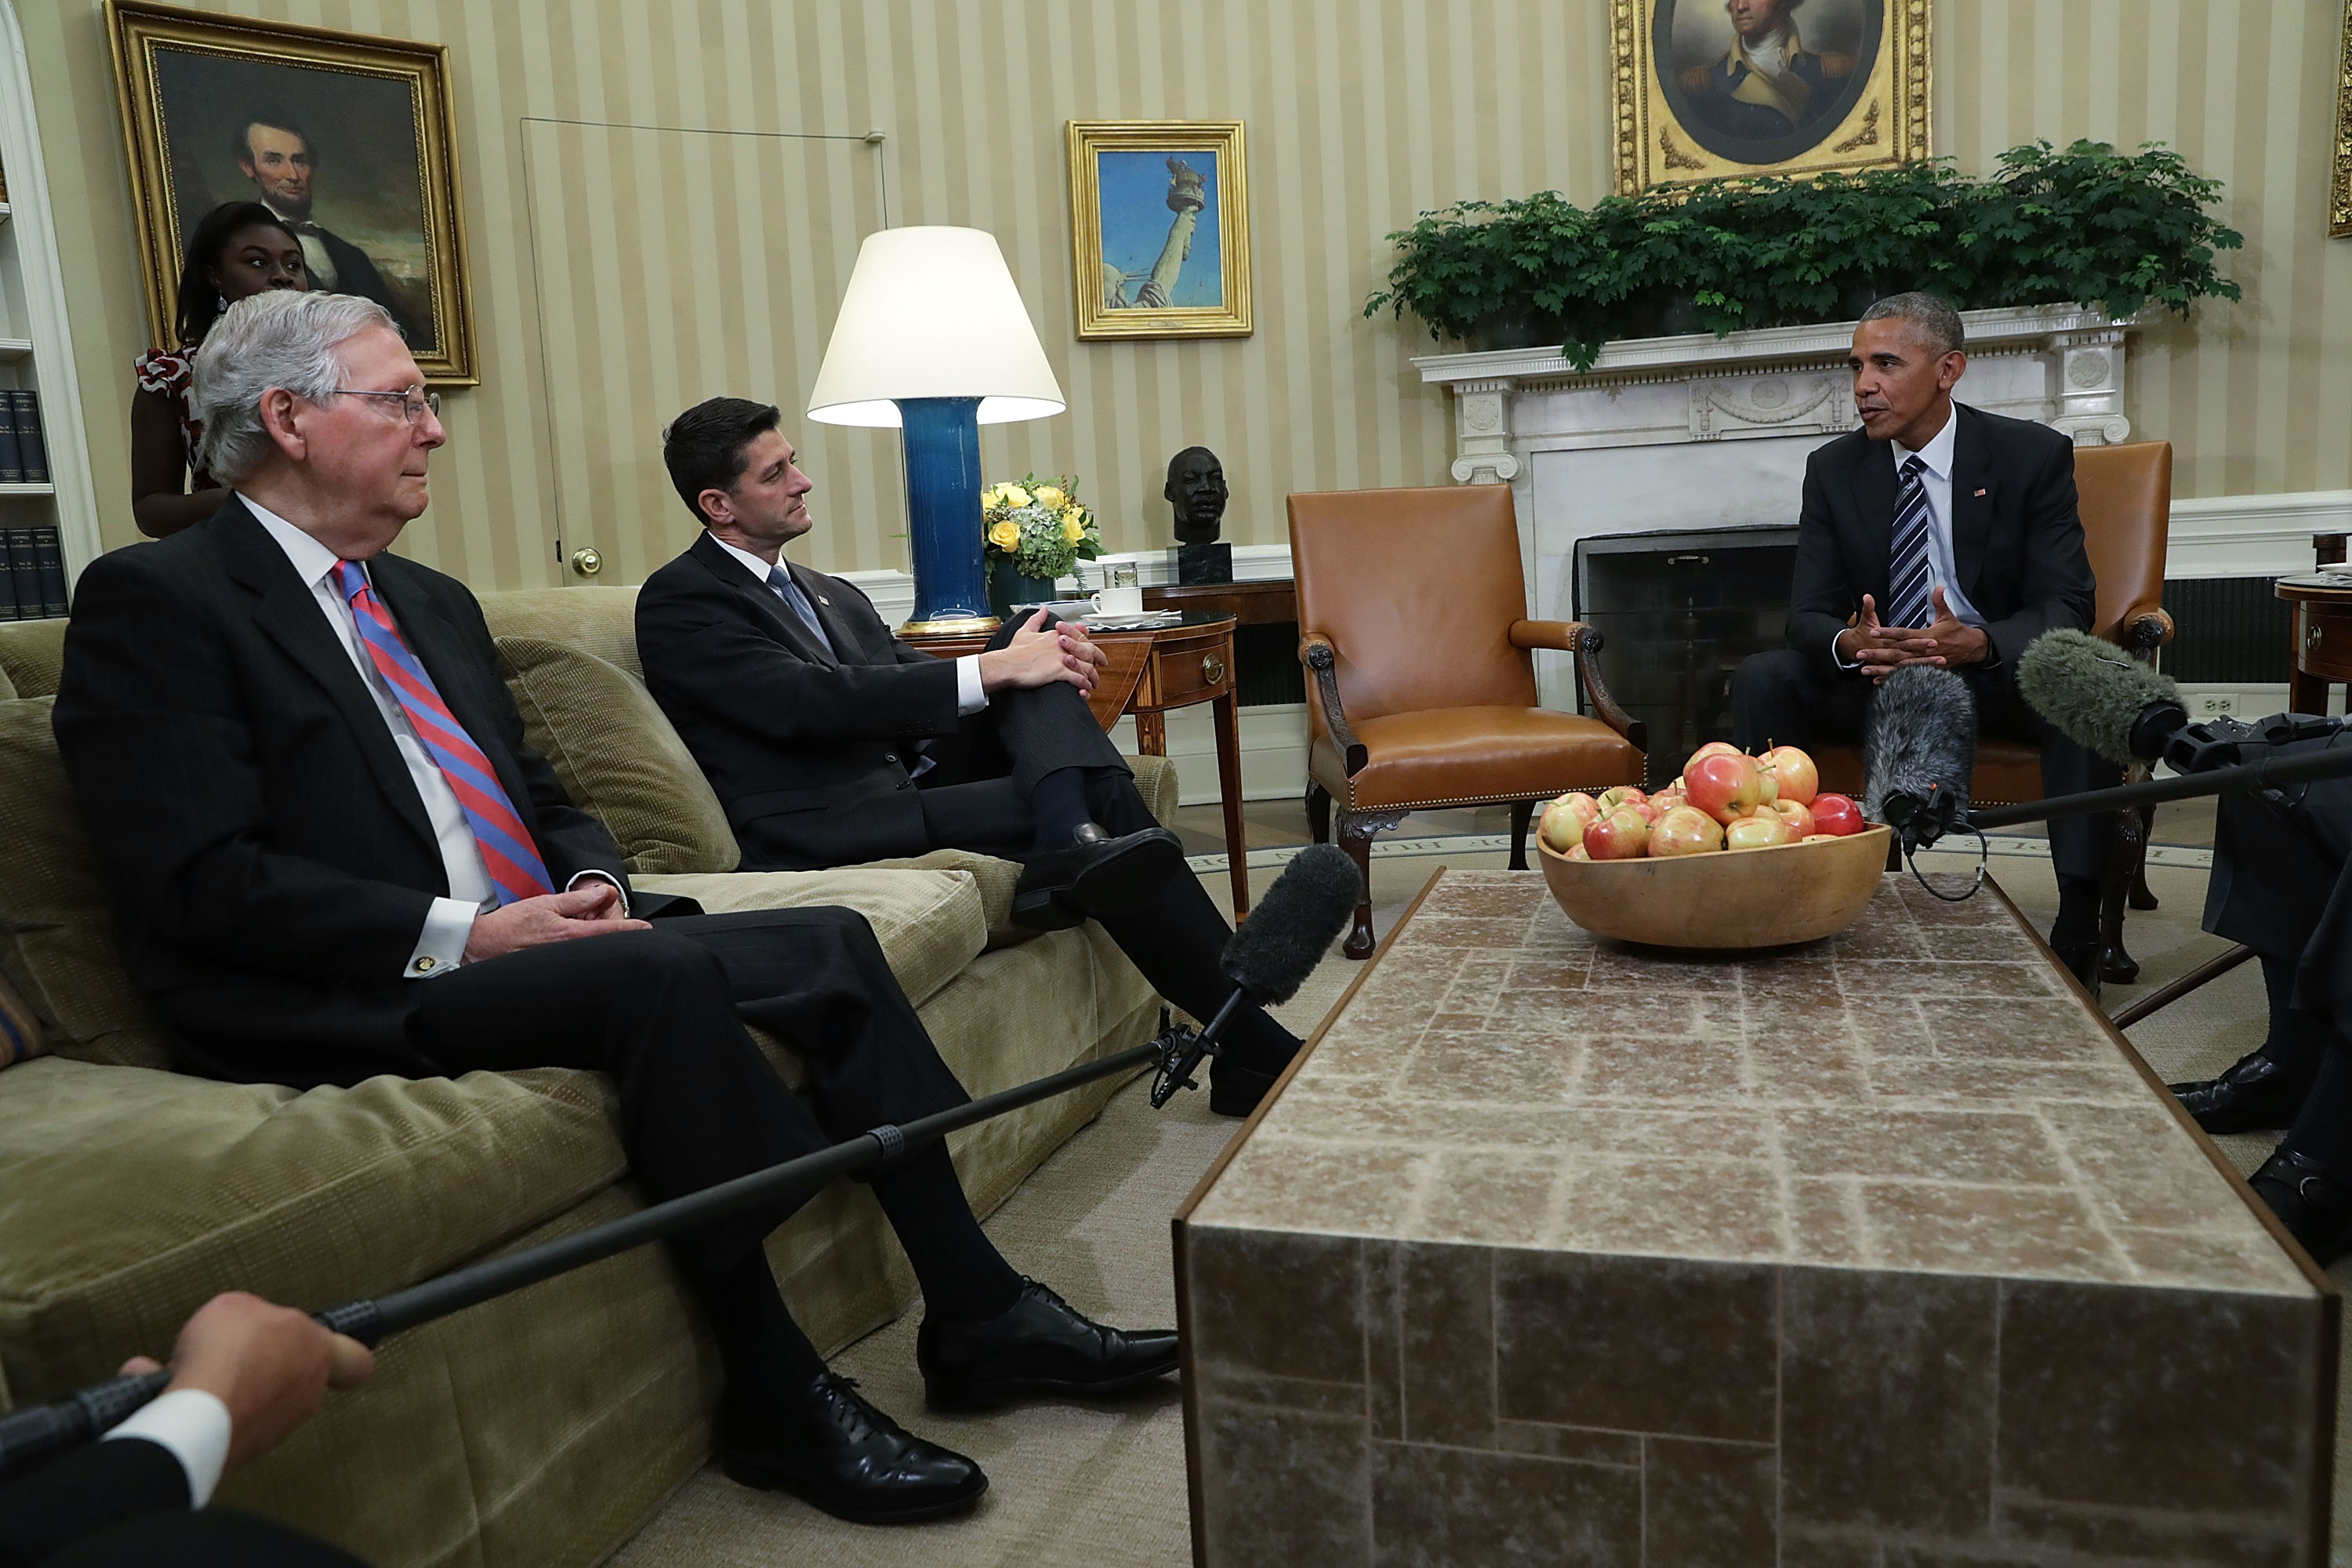 Sen. Mitch McConnell (R-KY), left, and Rep. Paul Ryan (R-WI) listen to President Barack Obama during an Oval Office meeting at the White House&nbsp;in 2016.